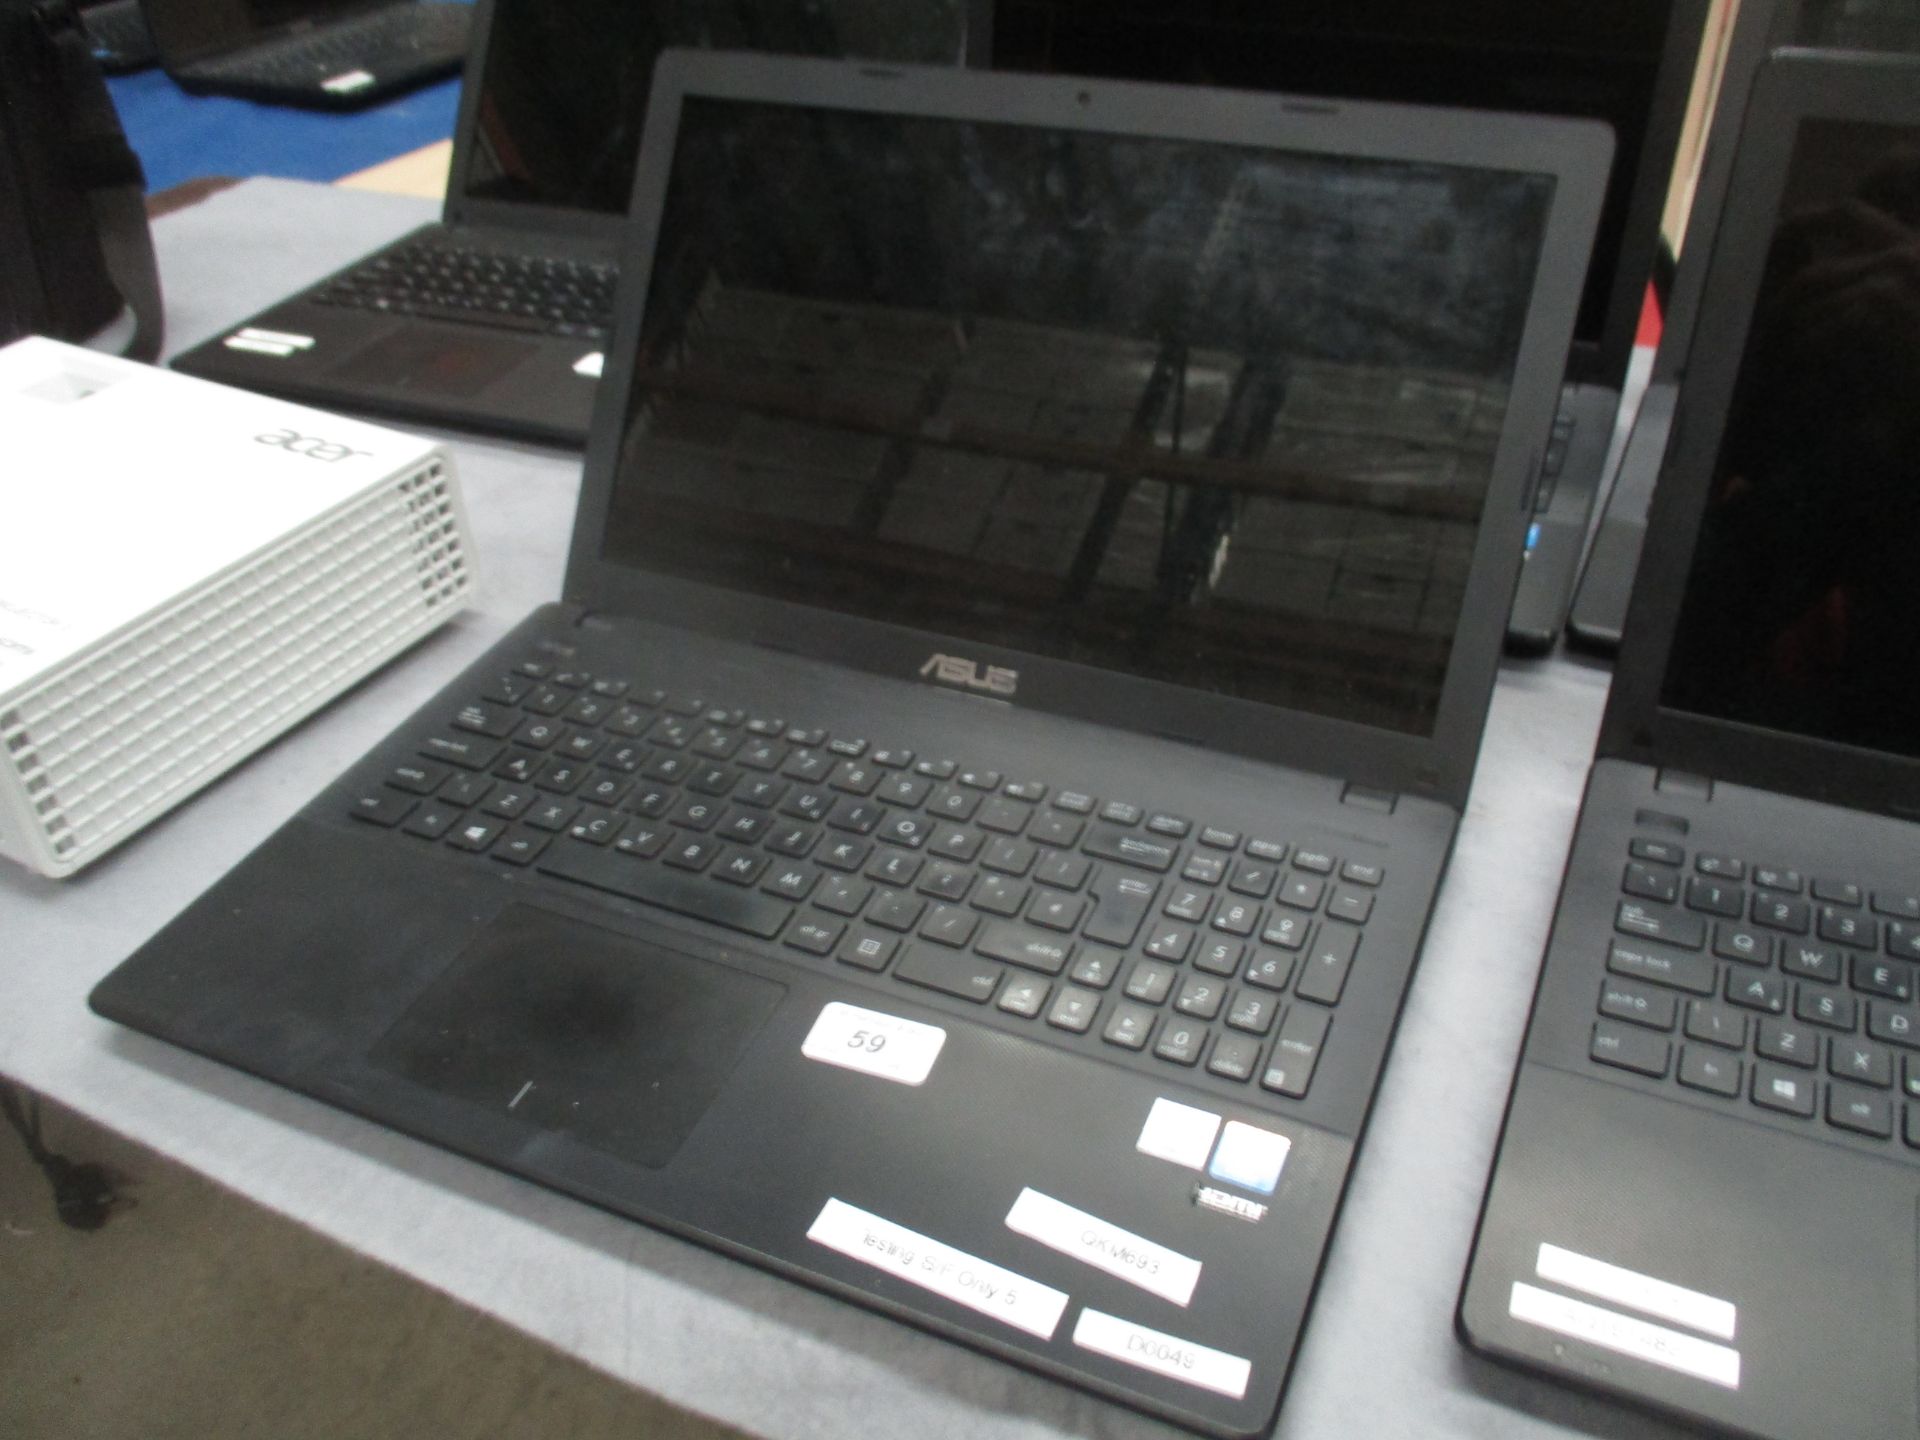 An ASUS X551M laptop computer with power lead